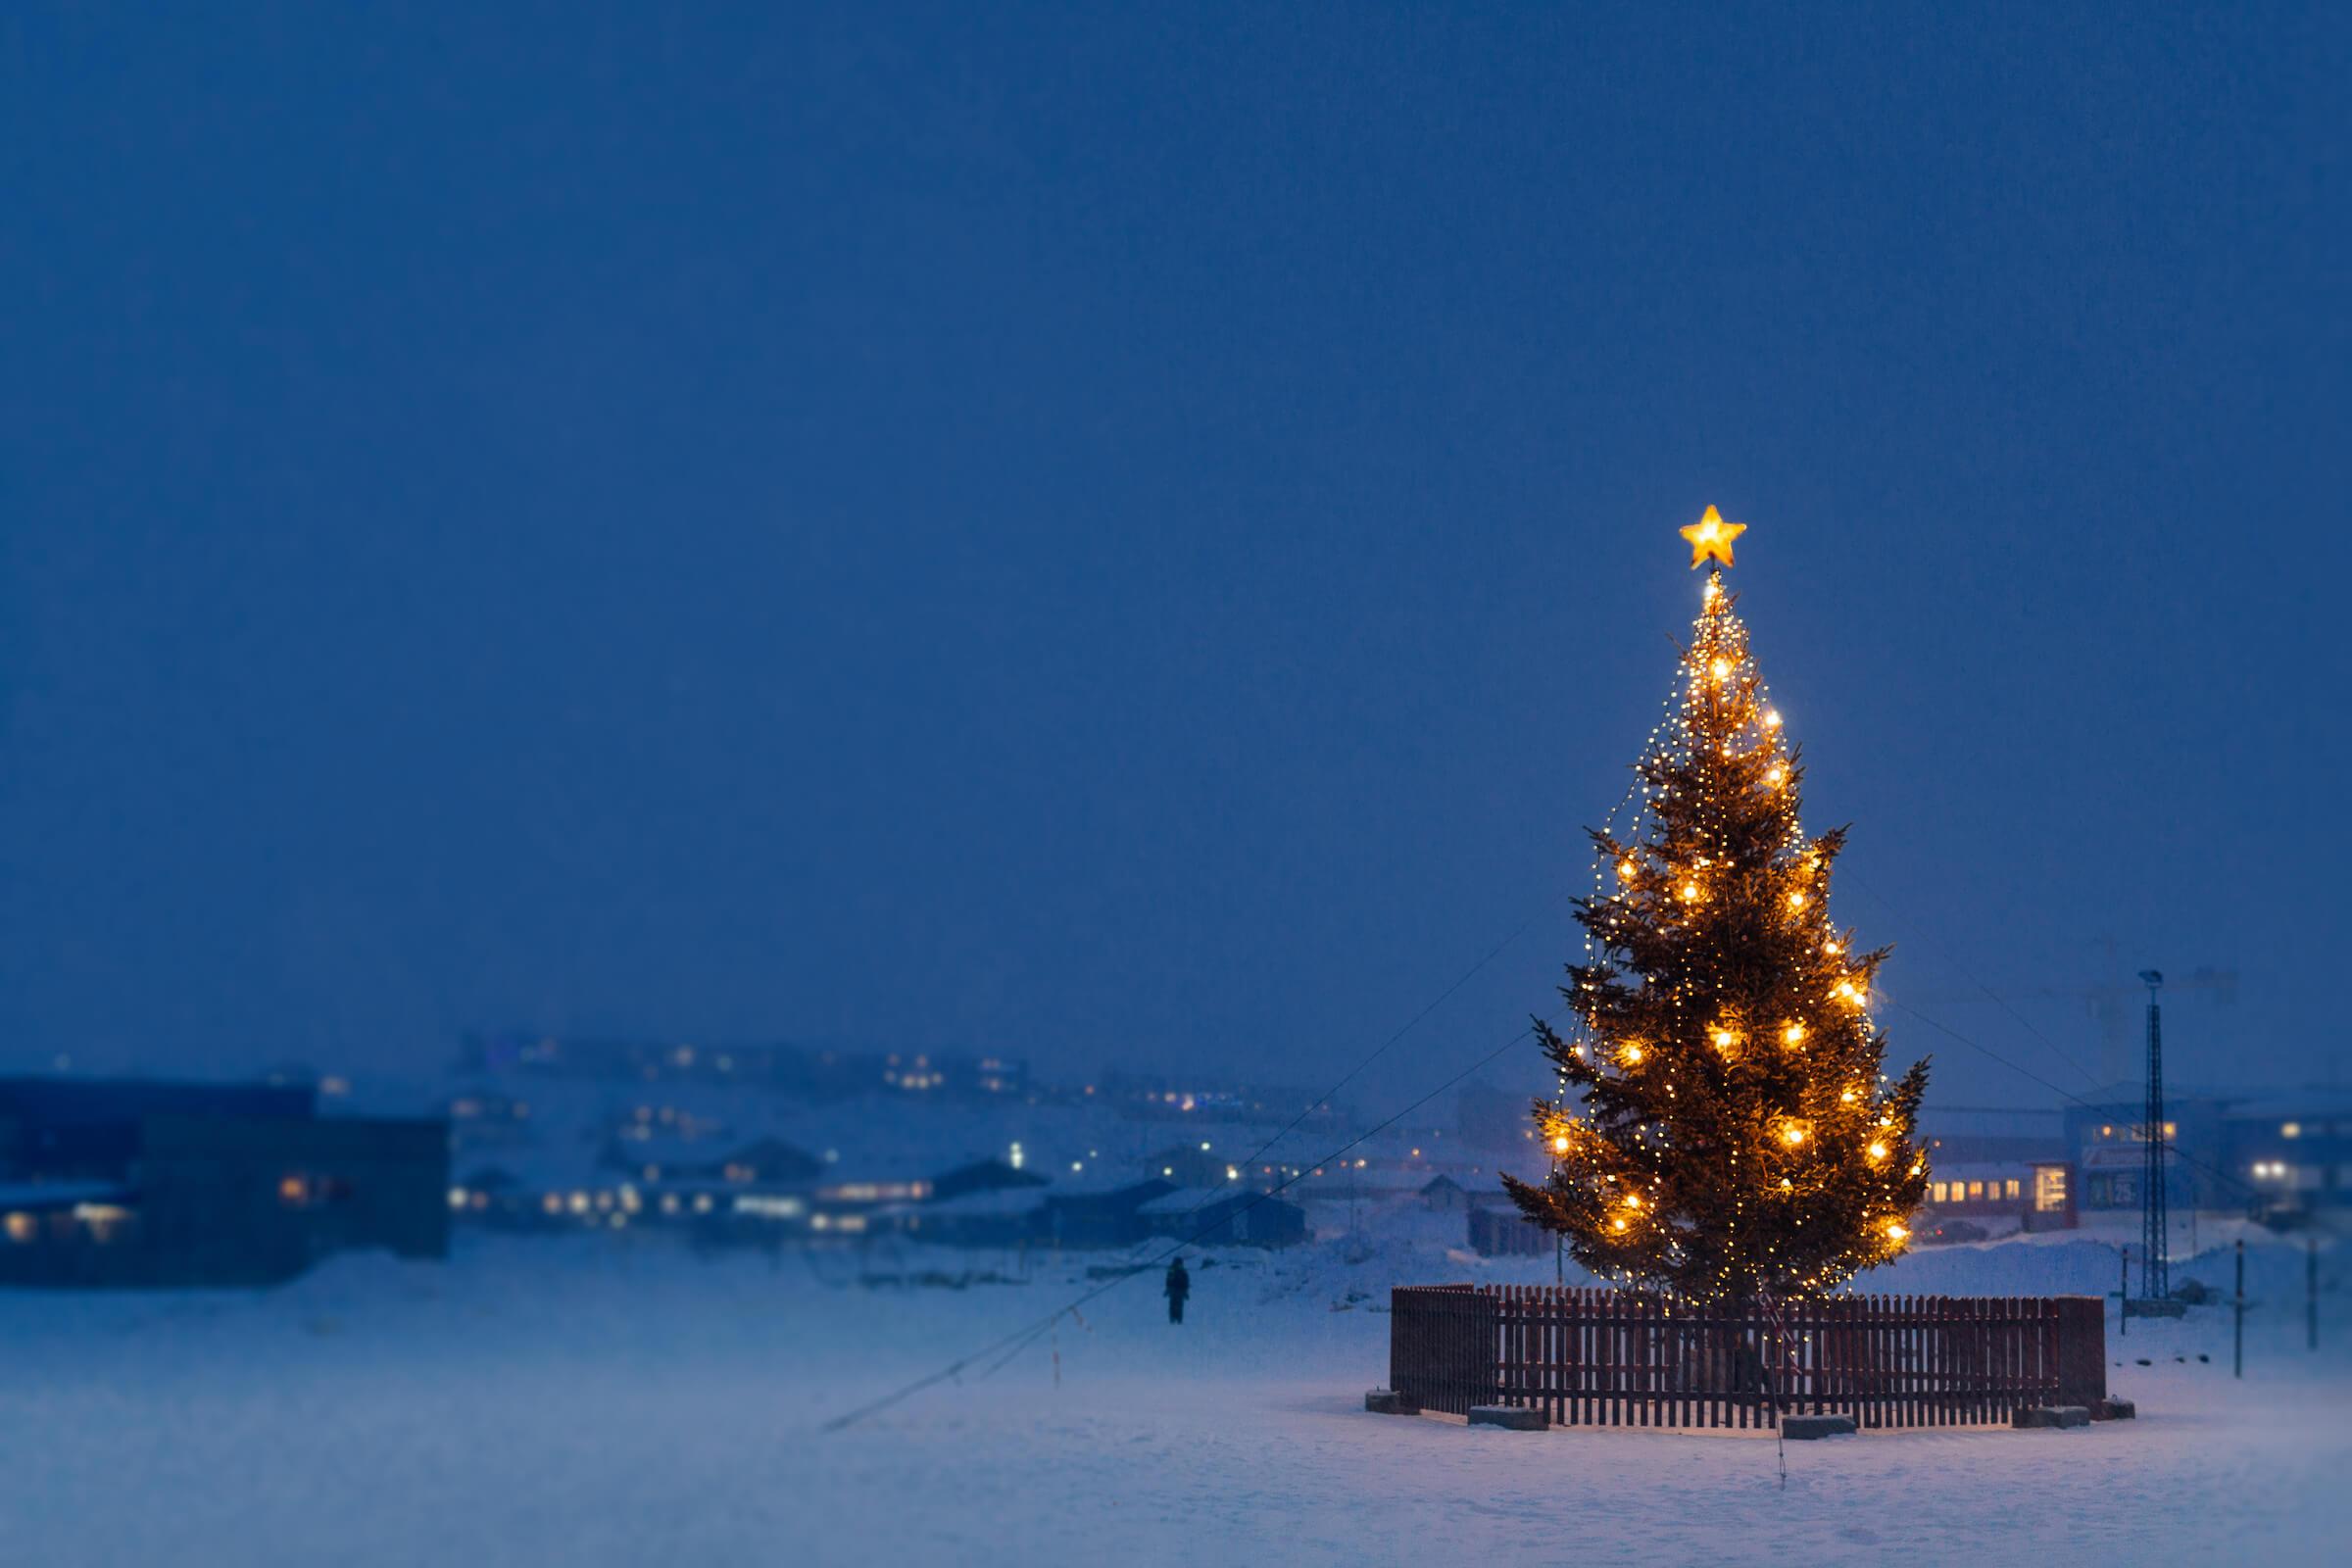 A christmas tree in Nuuk in Greenland on a snowy december afternoon. Photo by Rebecca Gustafsson